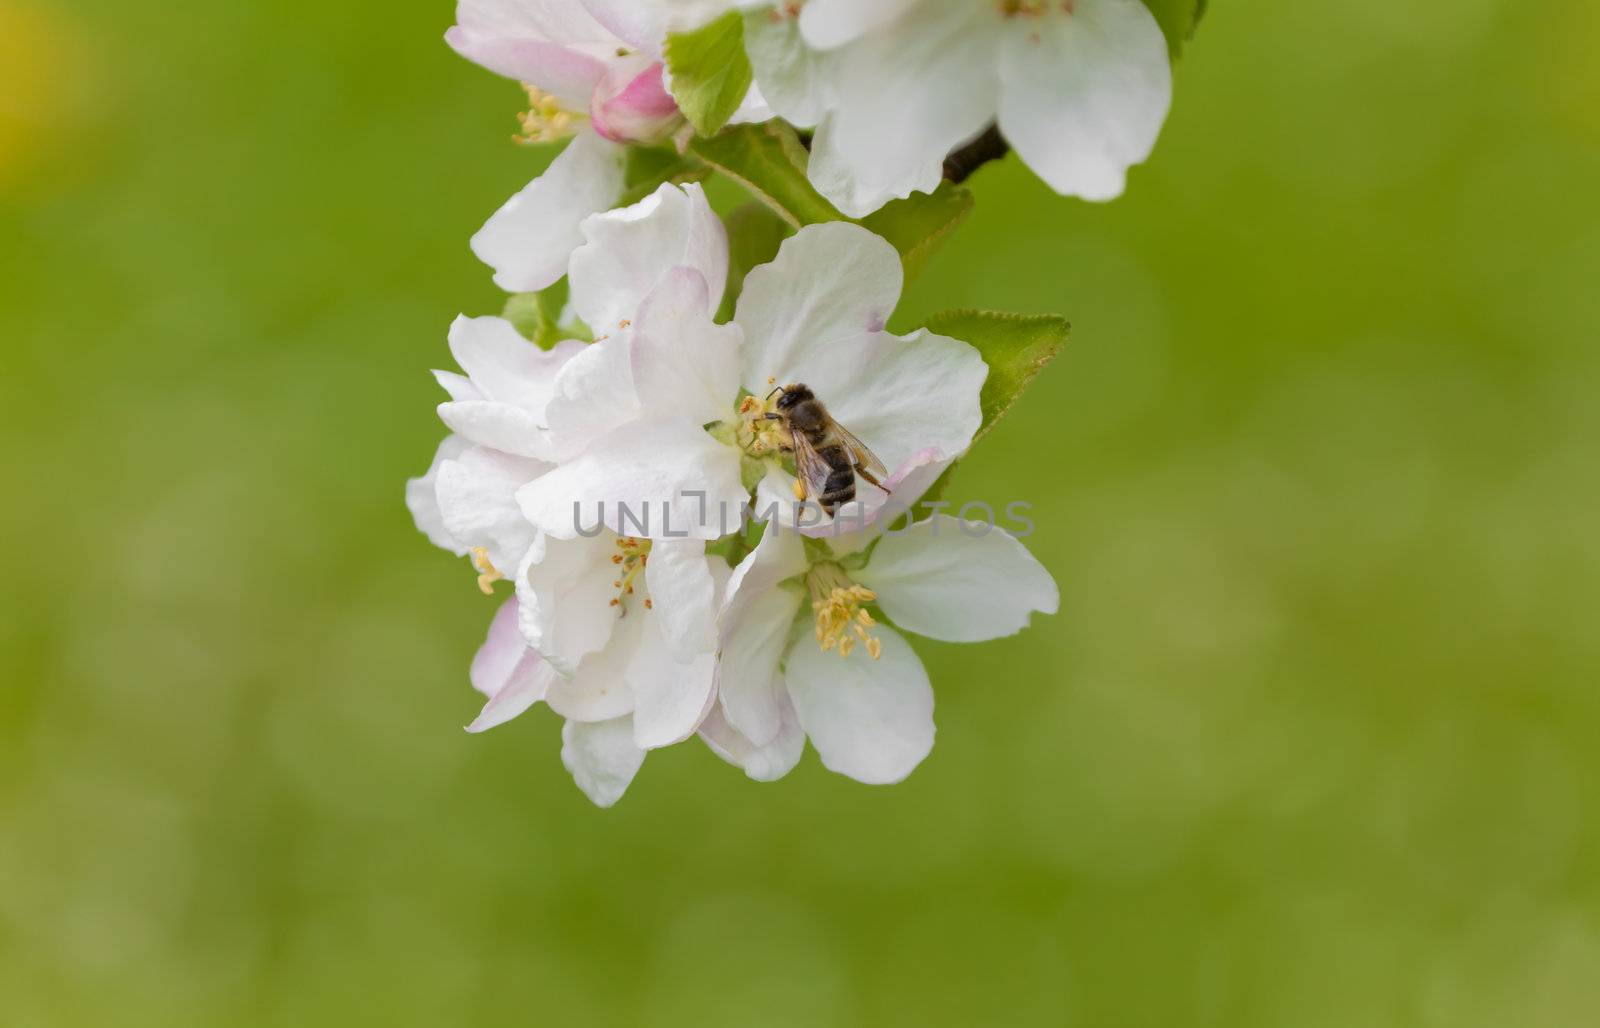 This image shows a apple blossom with bee